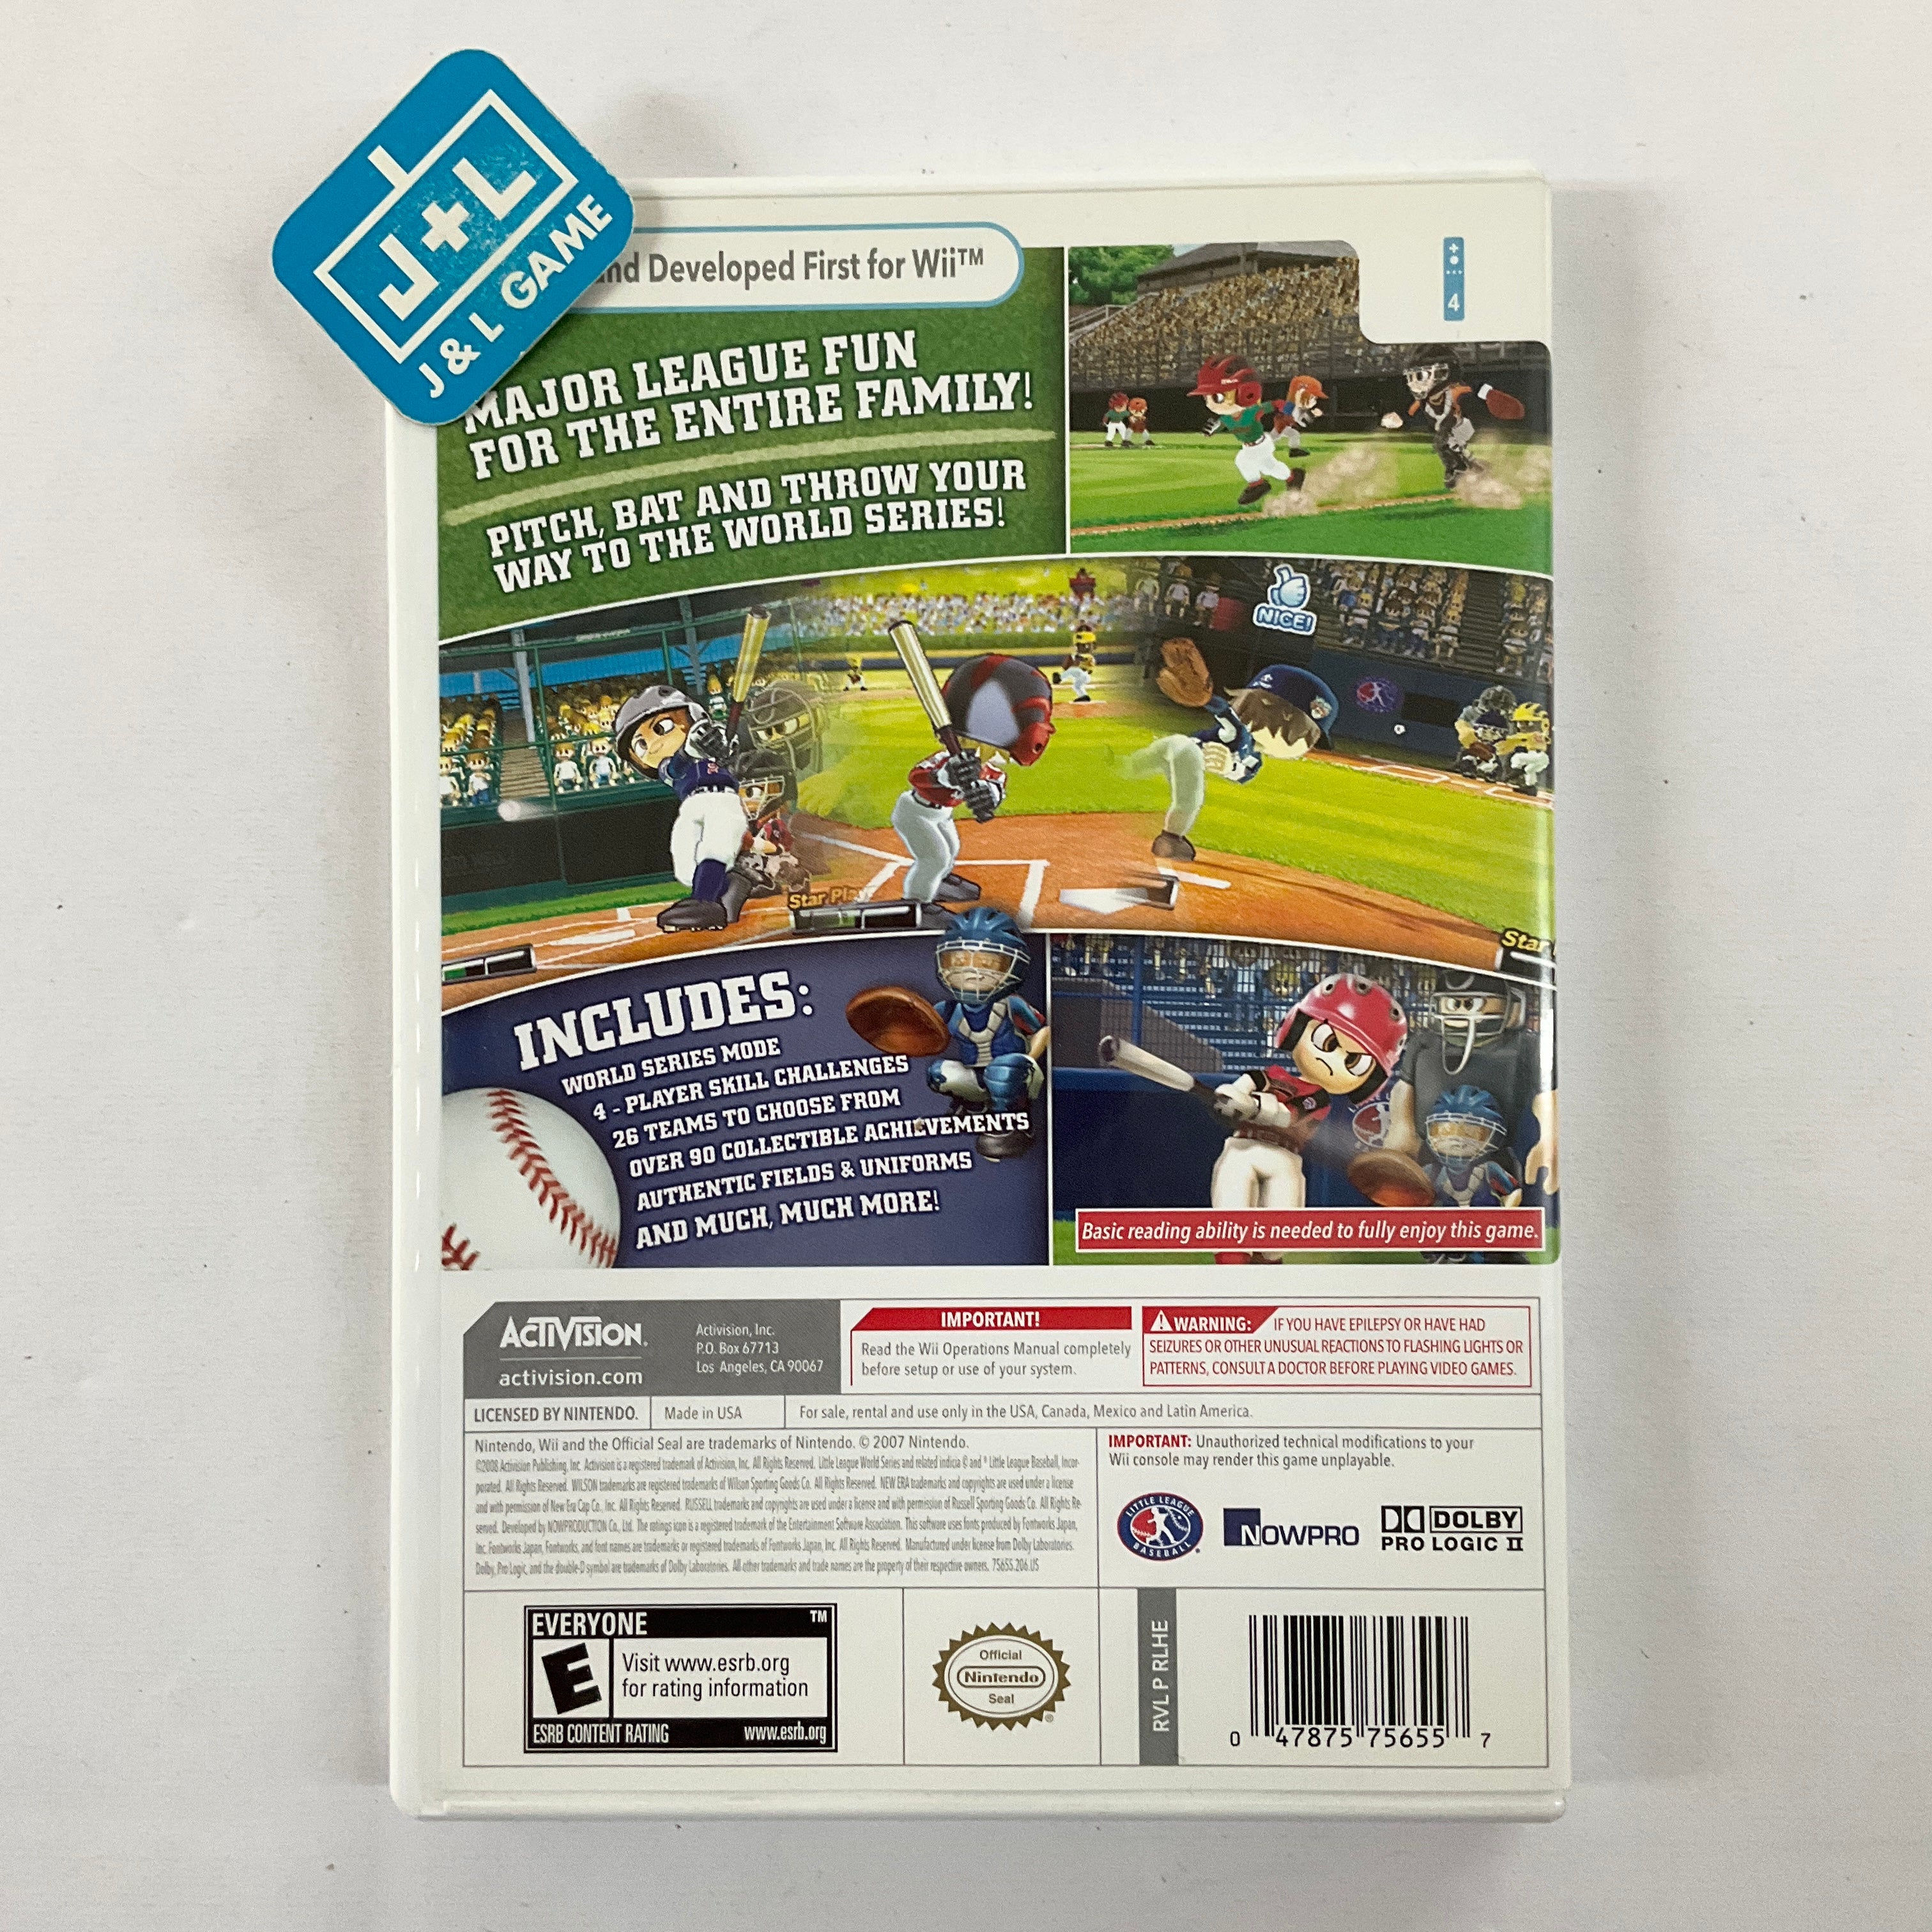 Little League World Series Baseball '08 - Nintendo Wii [Pre-Owned] Video Games ACTIVISION   